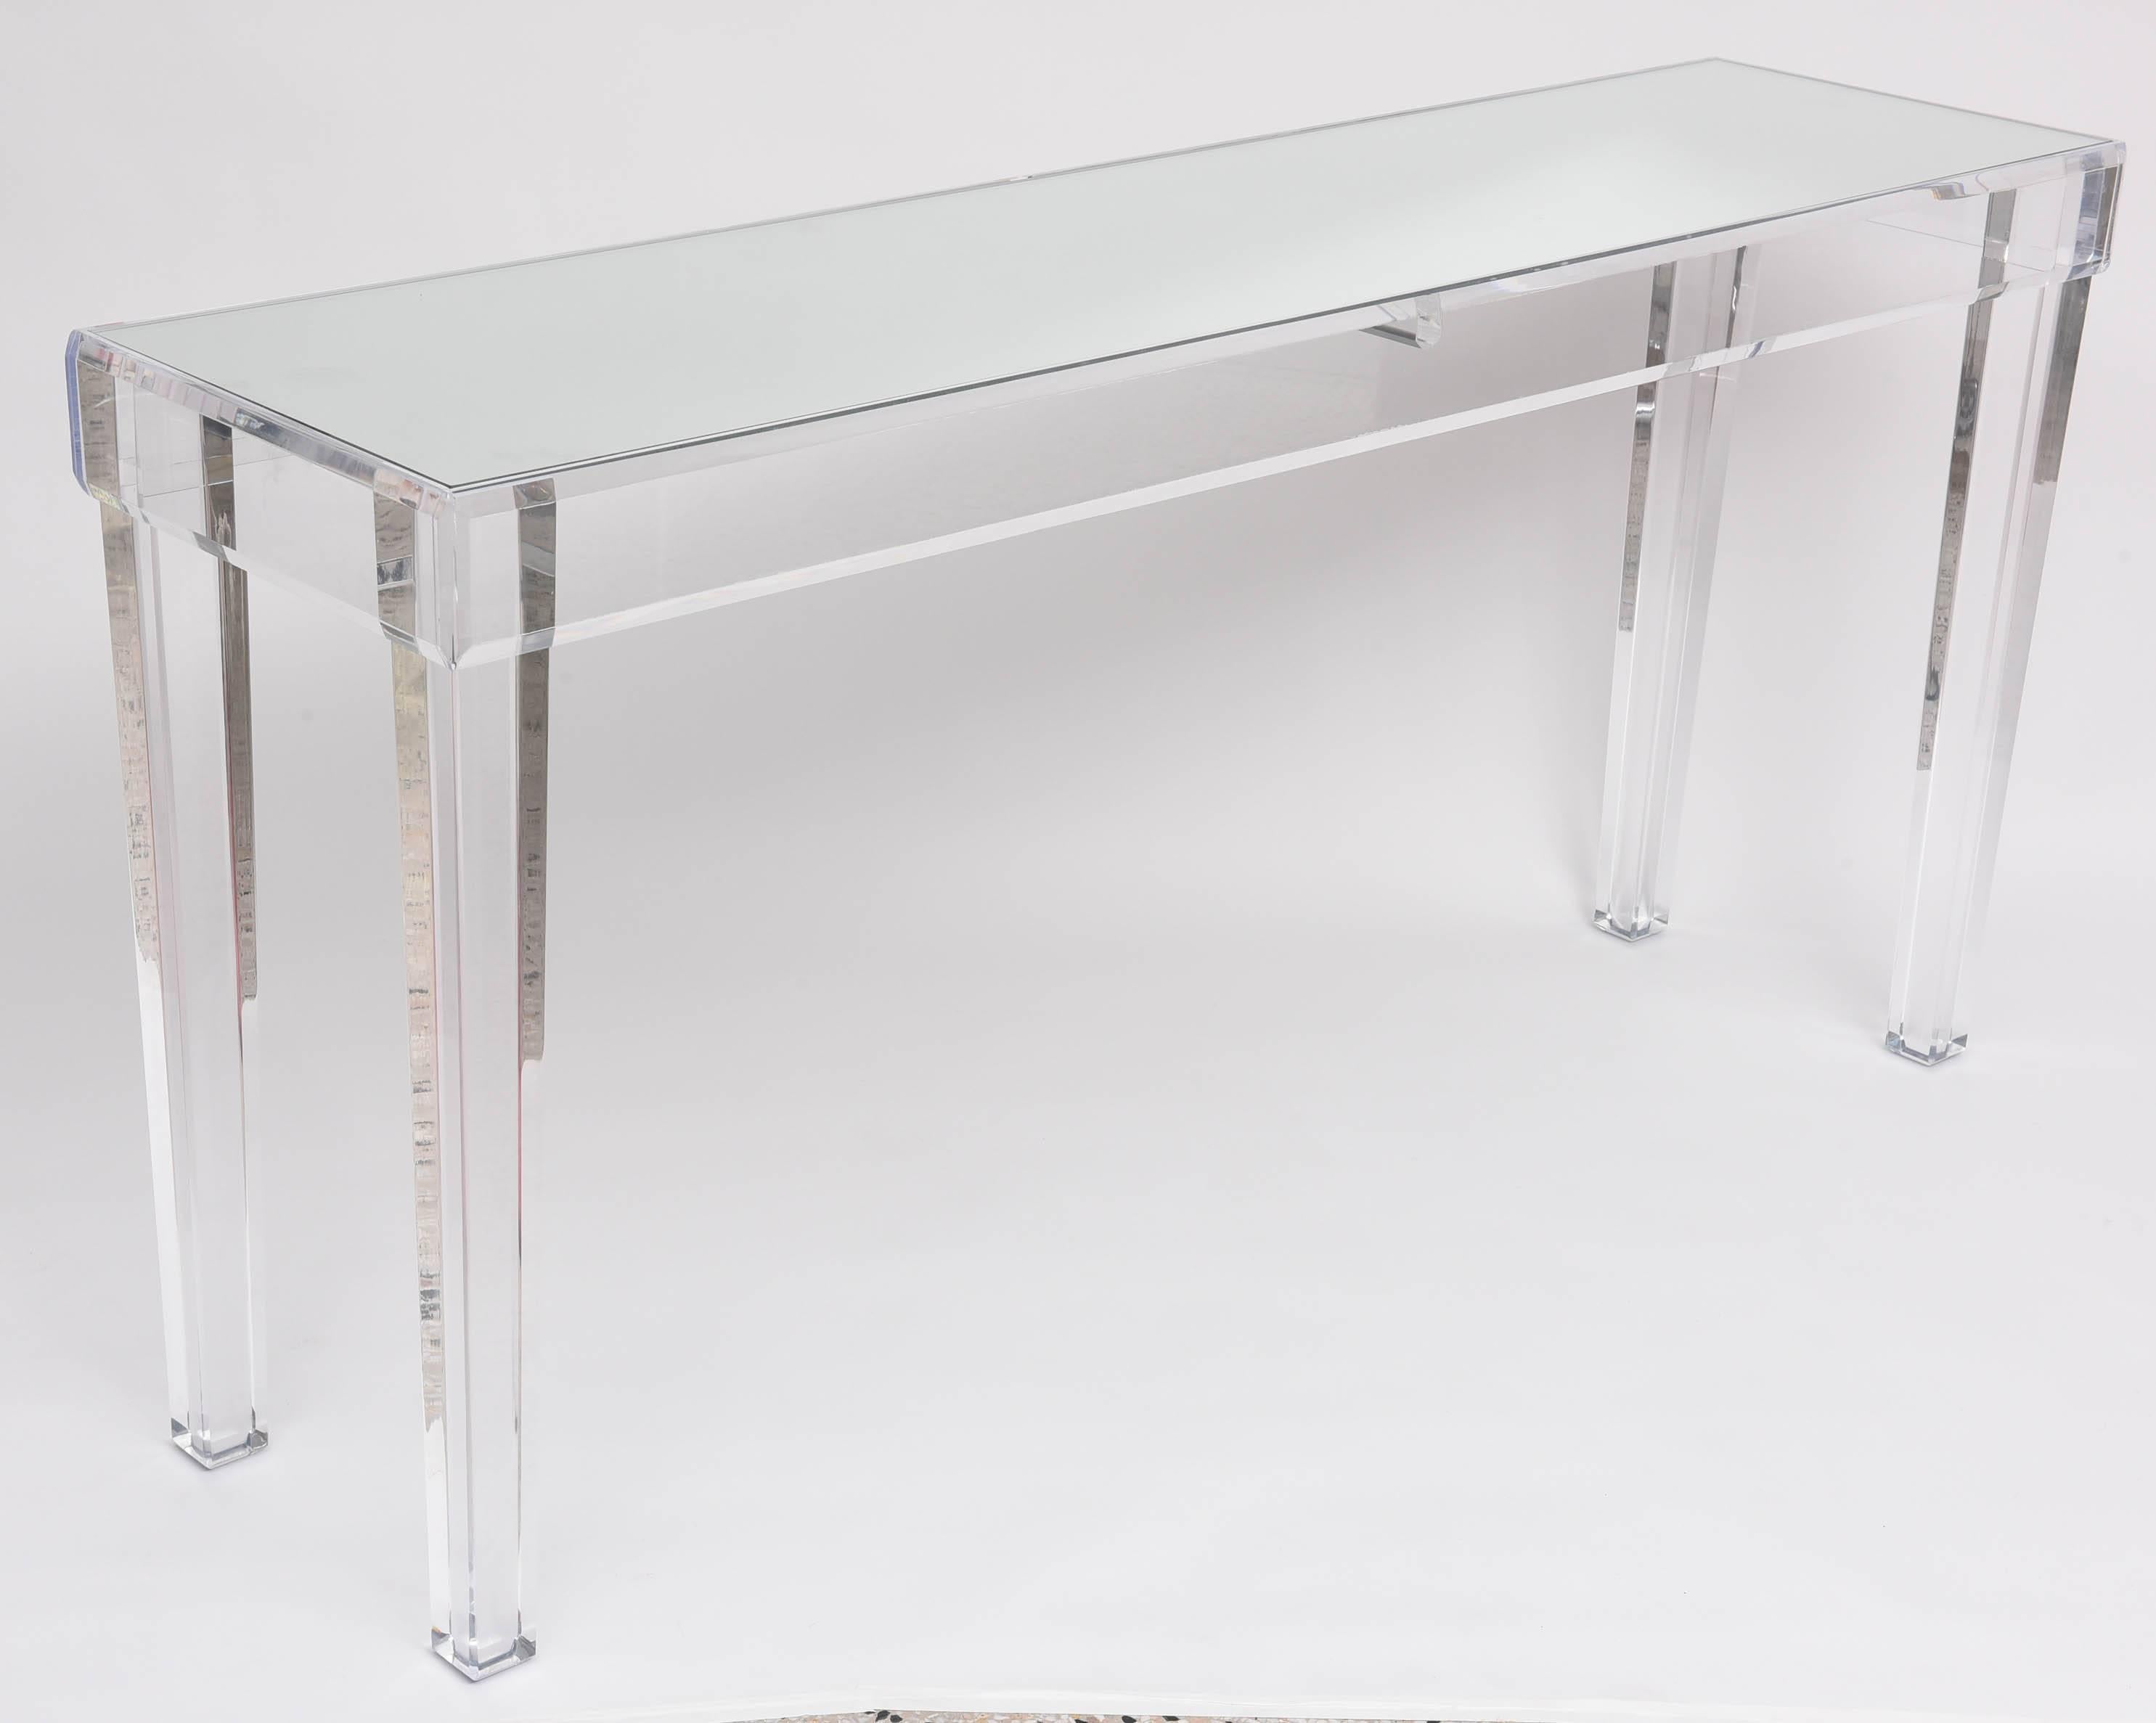 Bespoke Lucite and Mirror Console Table, American, Modern 2